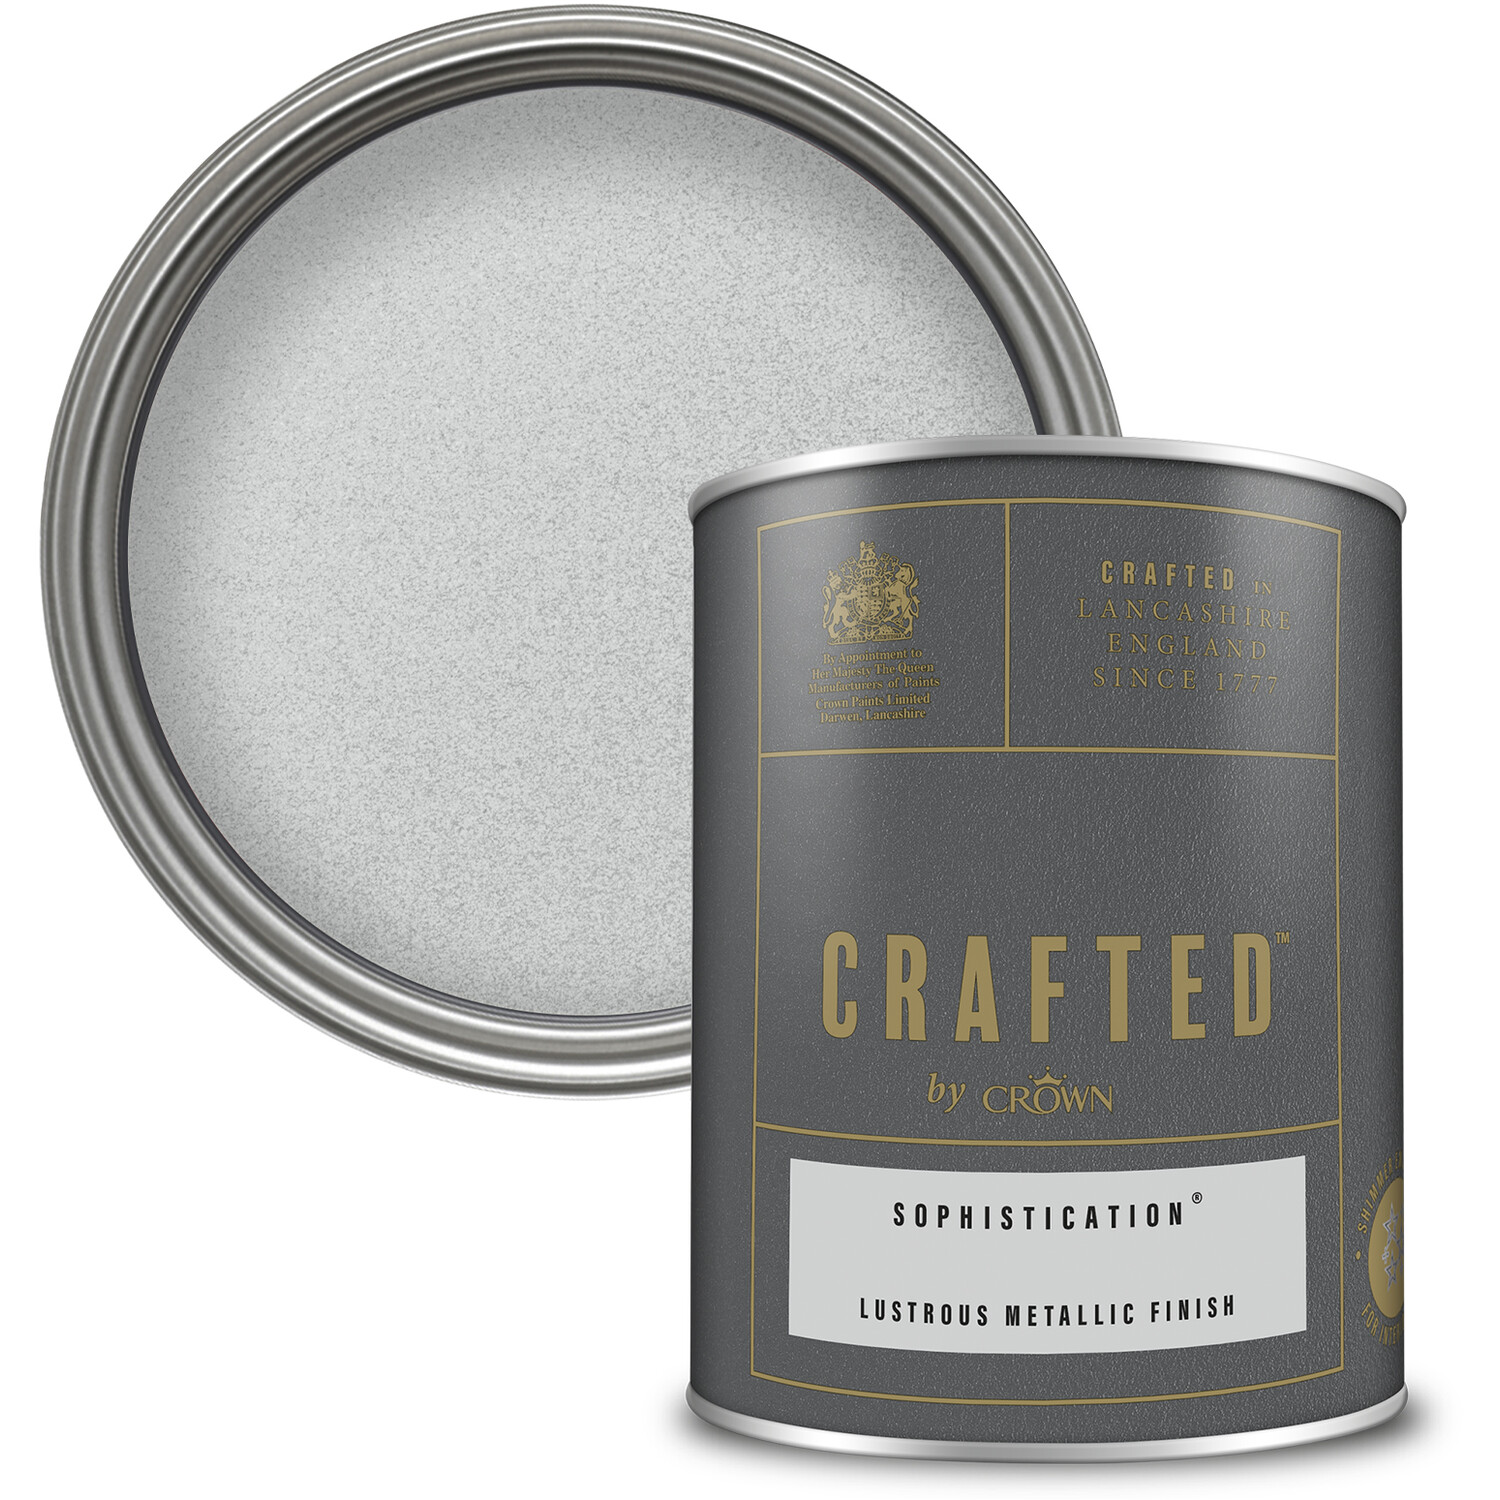 Crown Crafted Walls Wood and Metal Sophistication Lustrous Metallic Shimmer Emulsion Paint 1.25L Image 6